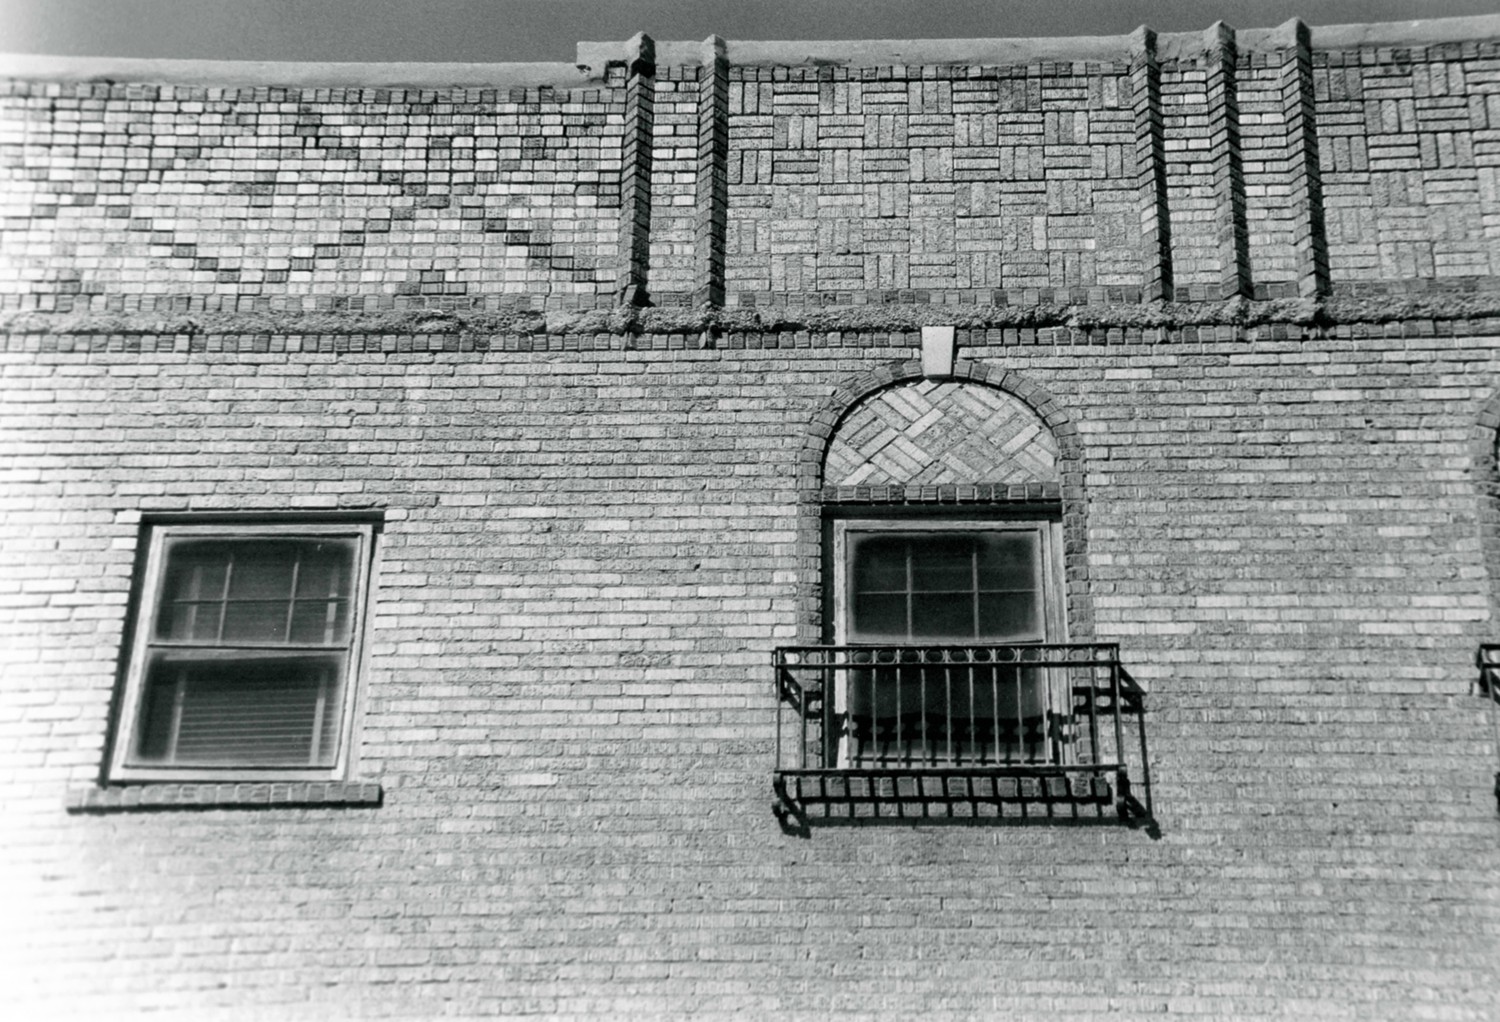 Schneider Hotel - Pampa Hotel, Pampa Texas Window and cornice detail, east facade (1985)